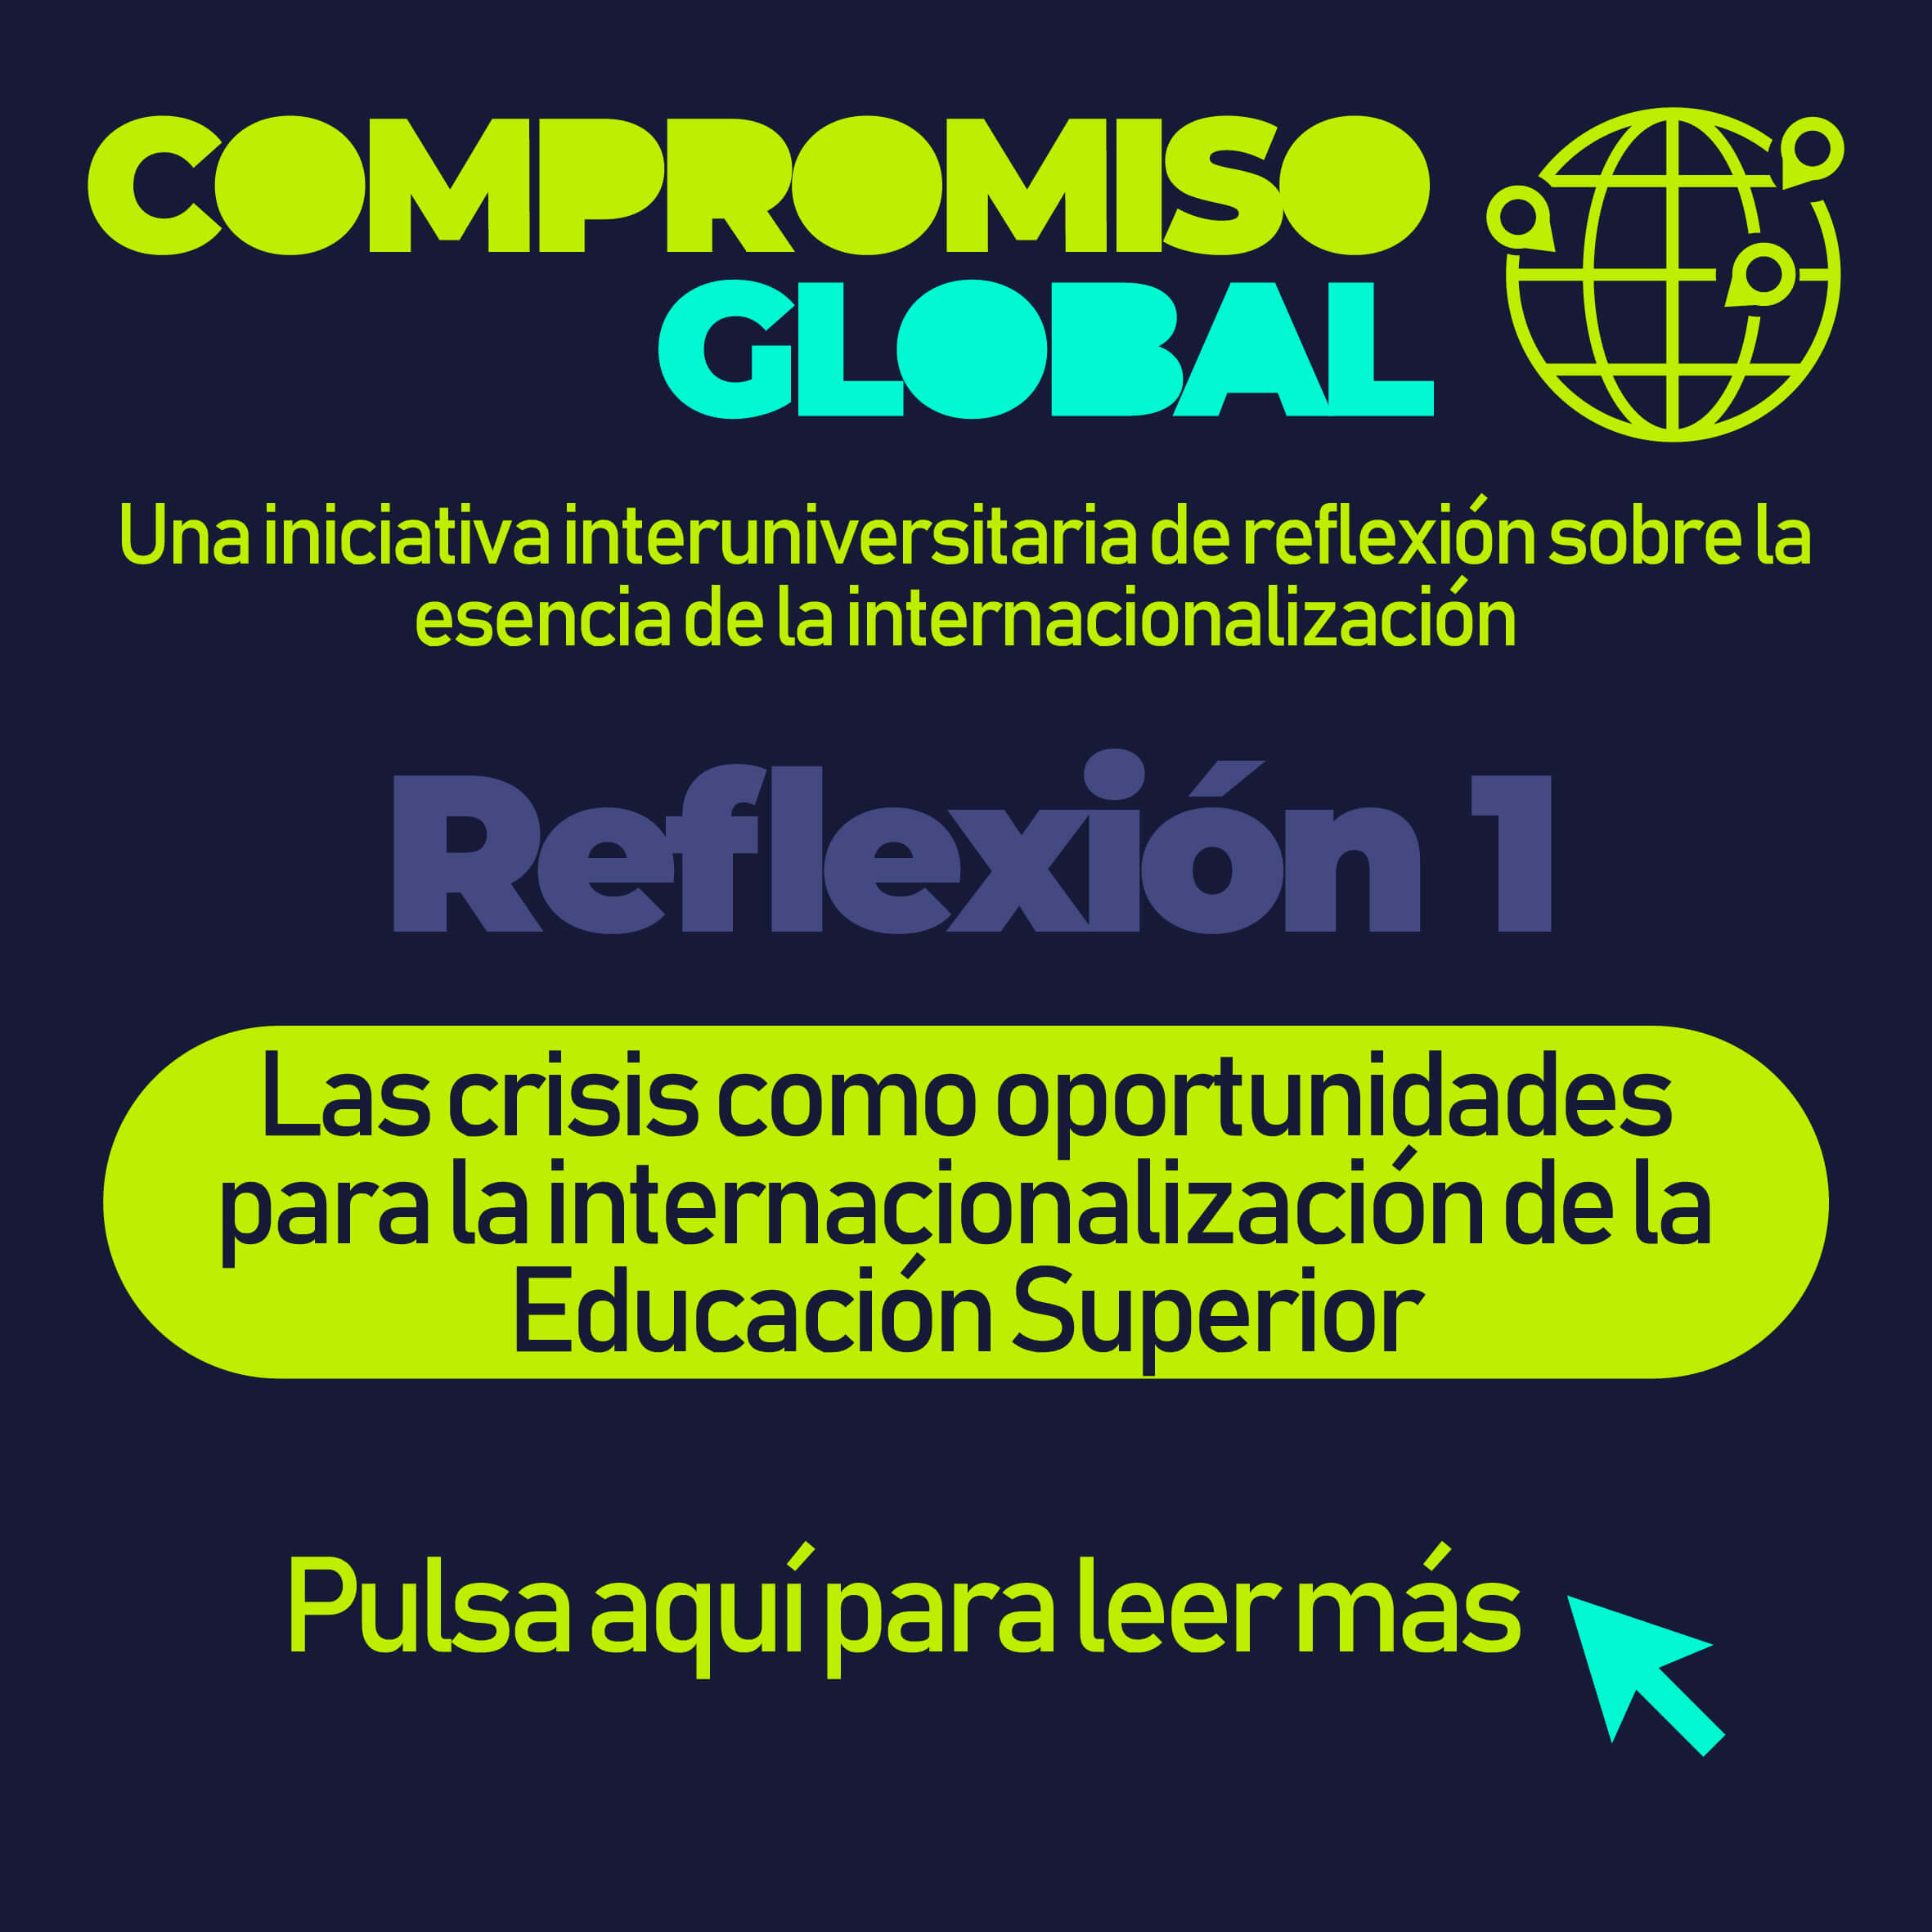 Compromiso global